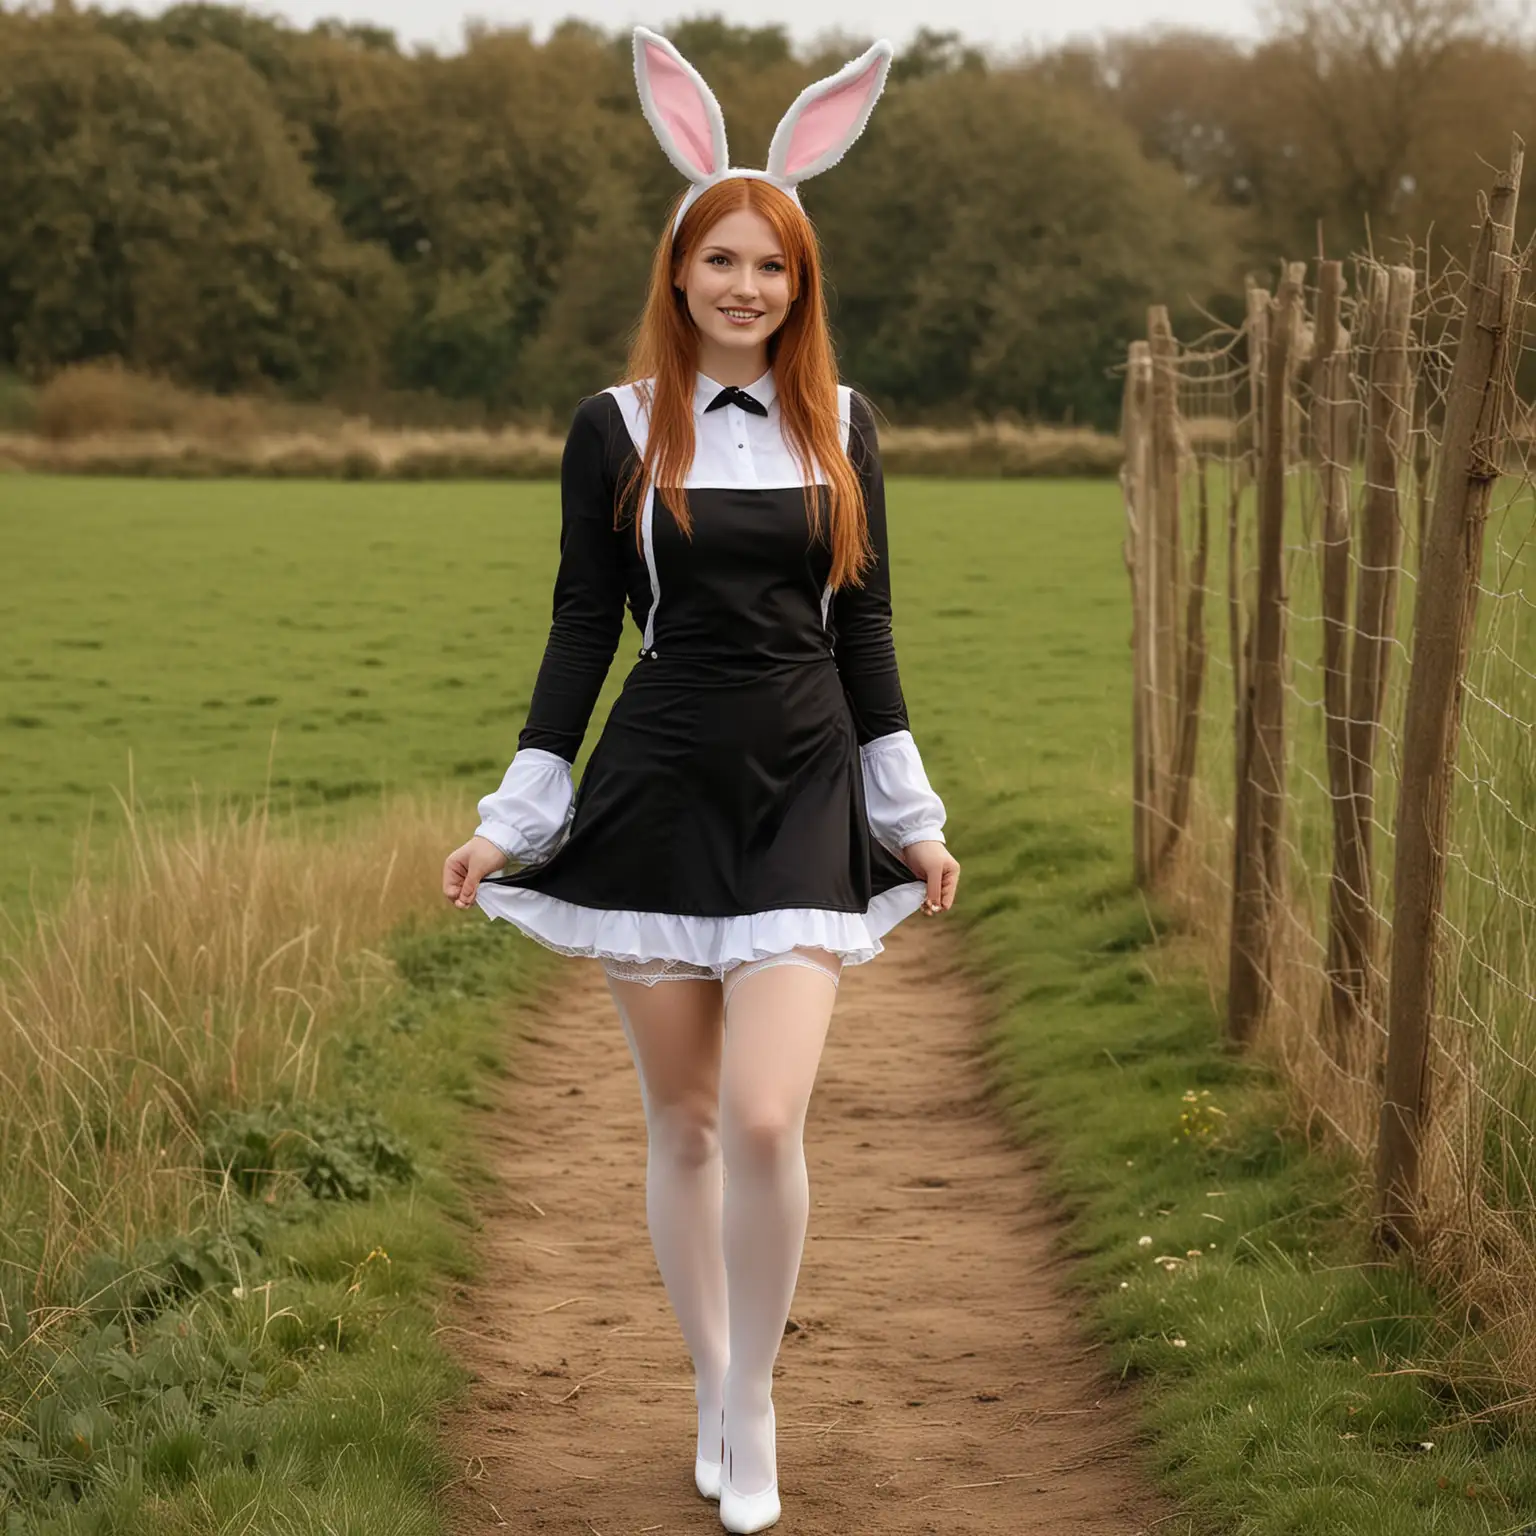 Seductive Ginny Weasley in Bunny Ears and Fishnet Stockings